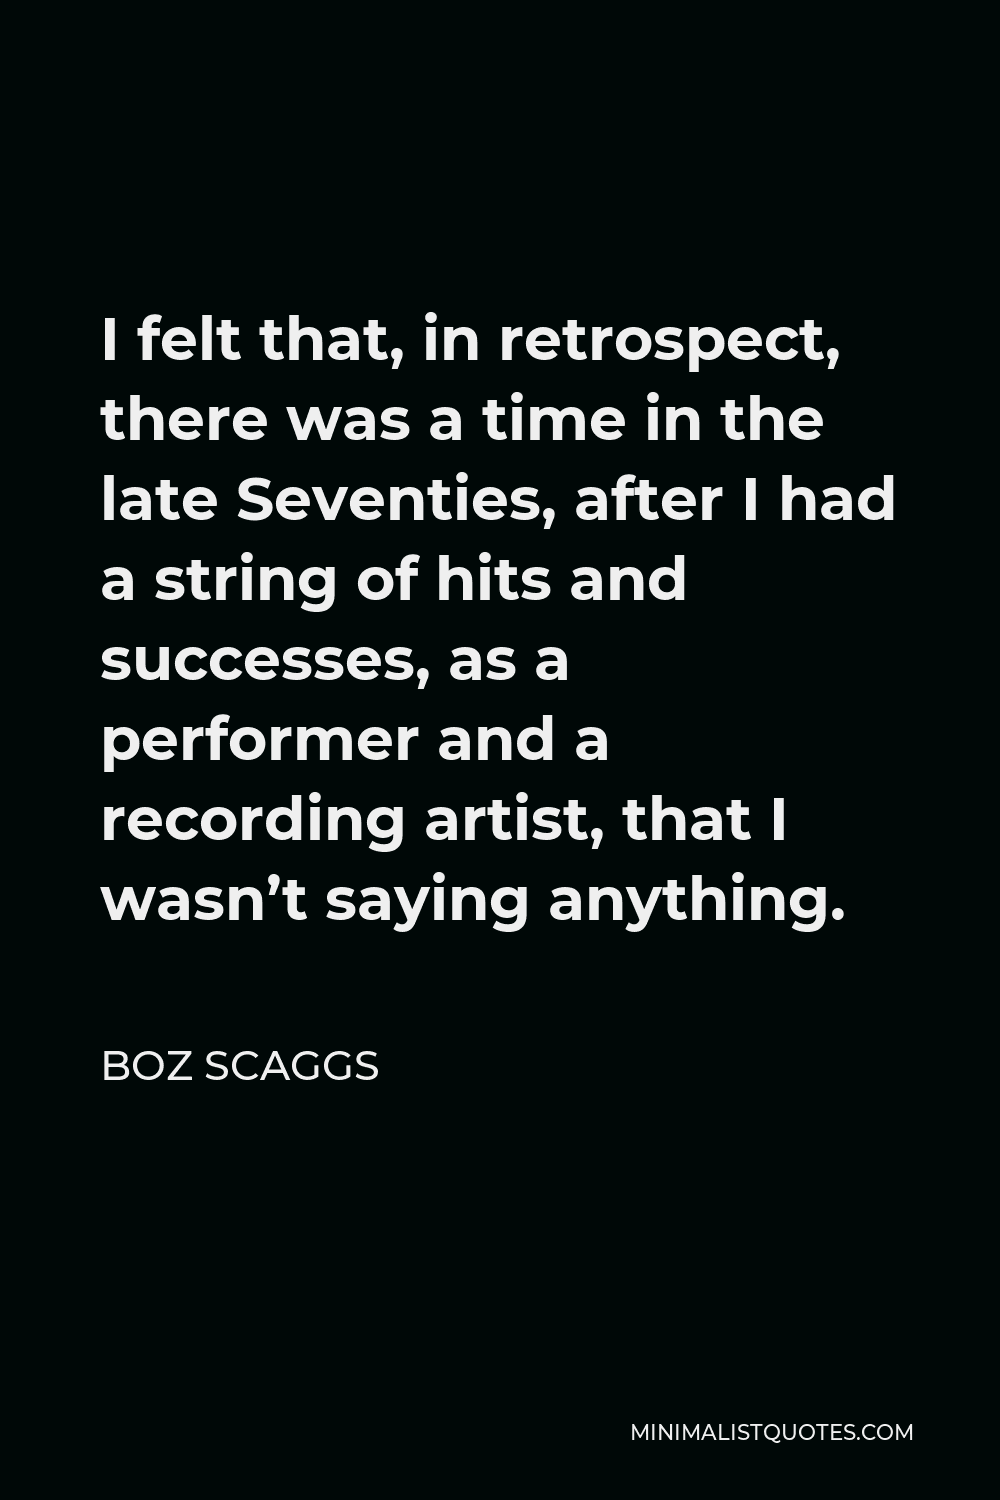 Boz Scaggs Quote - I felt that, in retrospect, there was a time in the late Seventies, after I had a string of hits and successes, as a performer and a recording artist, that I wasn’t saying anything.